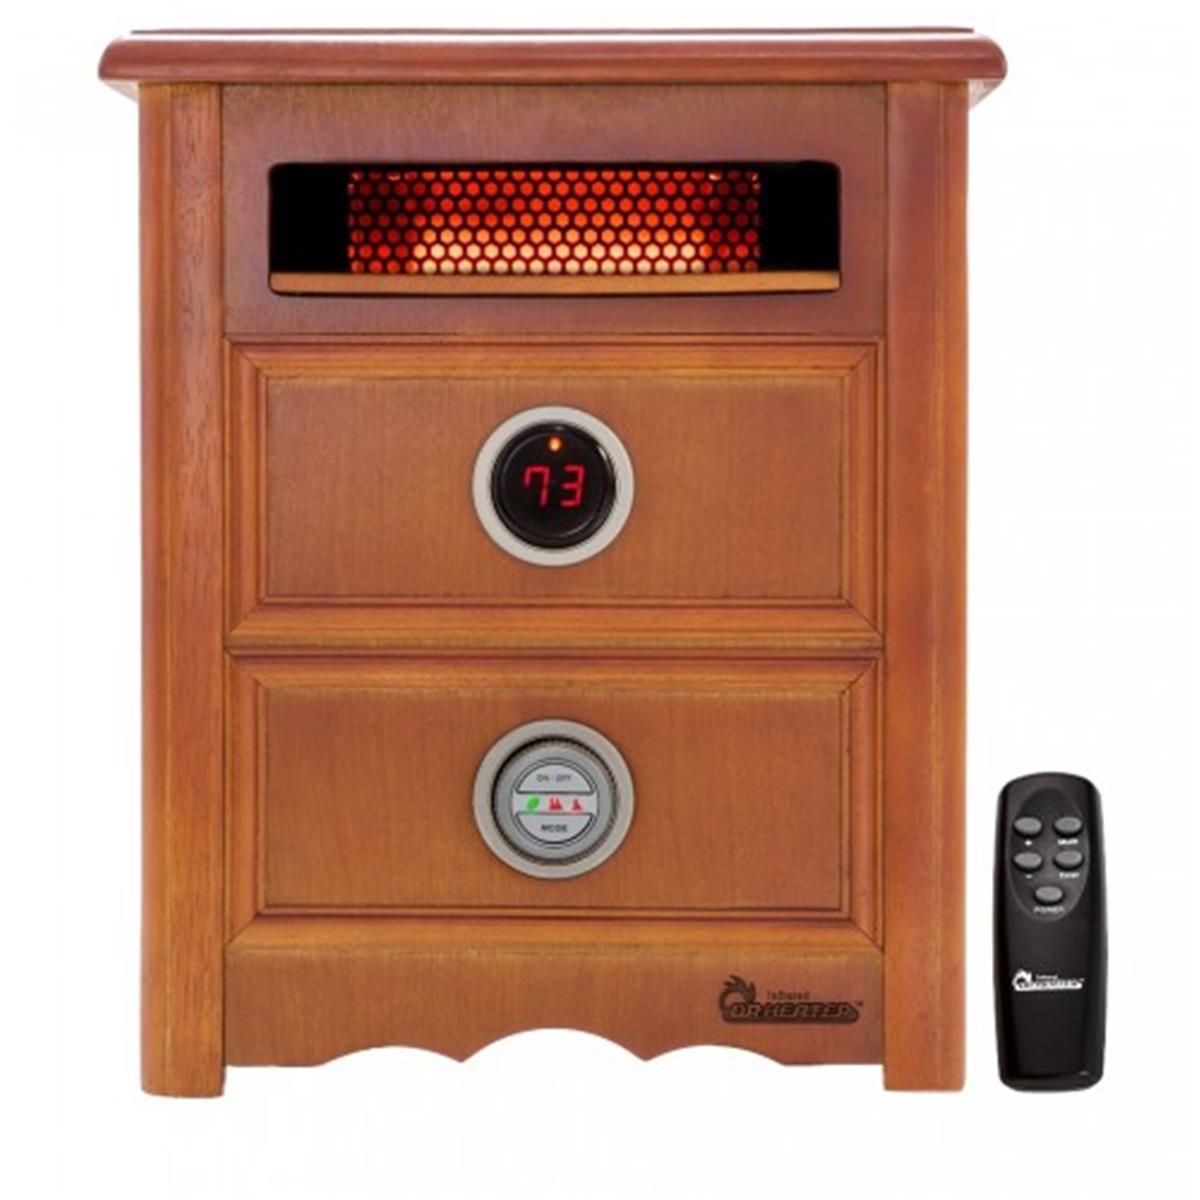 Image for Doctor D Dr. Heater USA DR-999 1500W Portable Infrared Space Heater with Nightstand Design, Furniture-Grade Cabinet, Cherry at Kohl's.